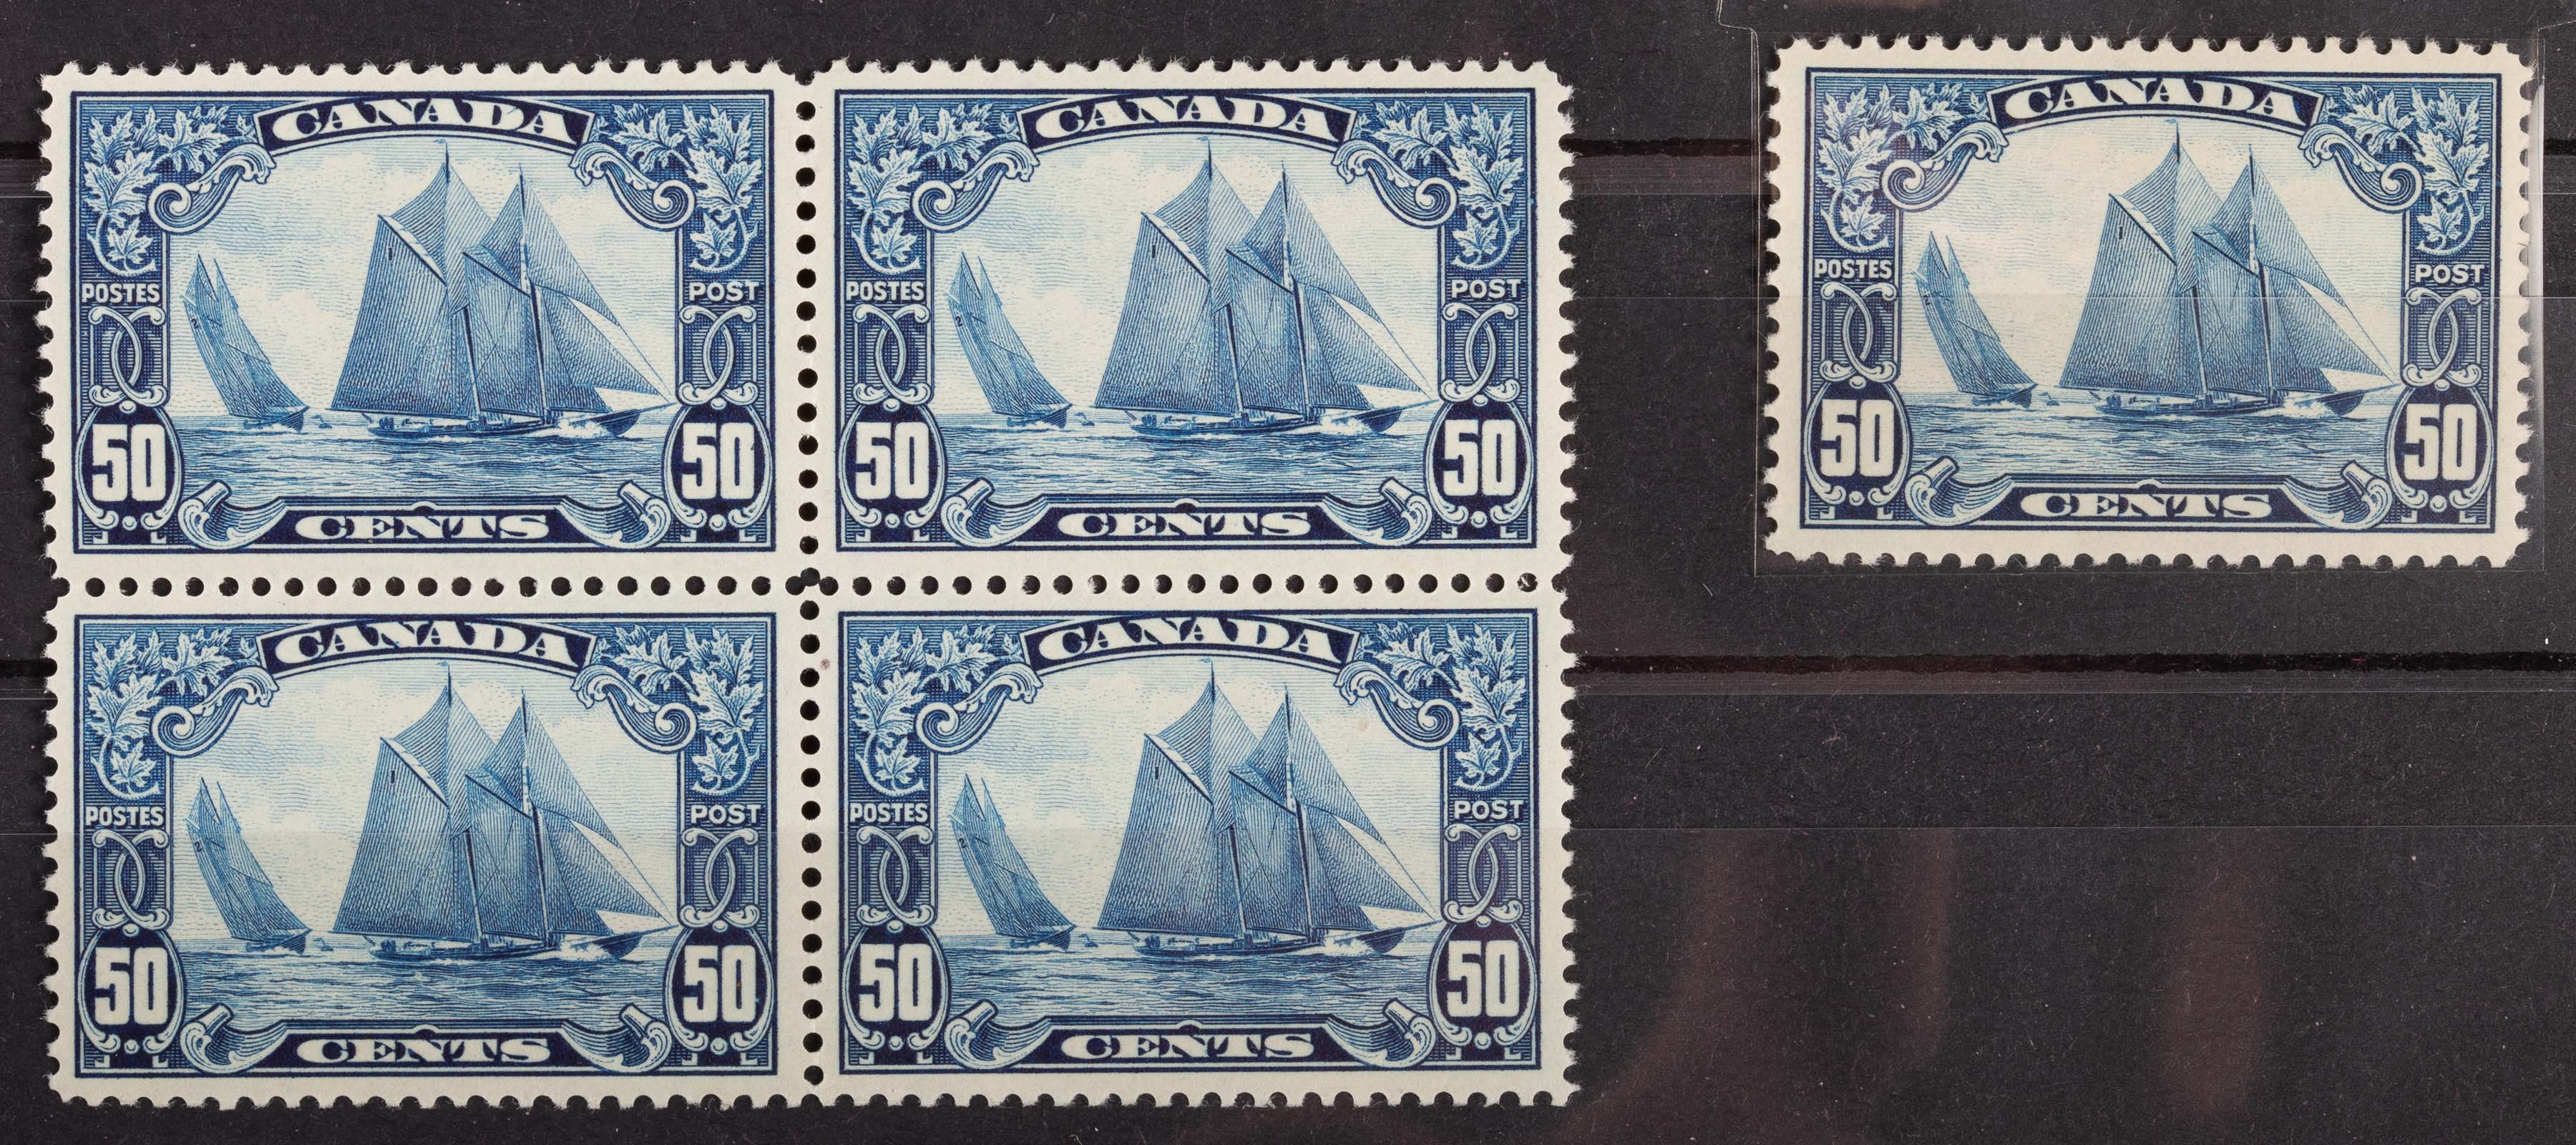 CANADA "BLUENOSE" POSTAGE STAMPS,